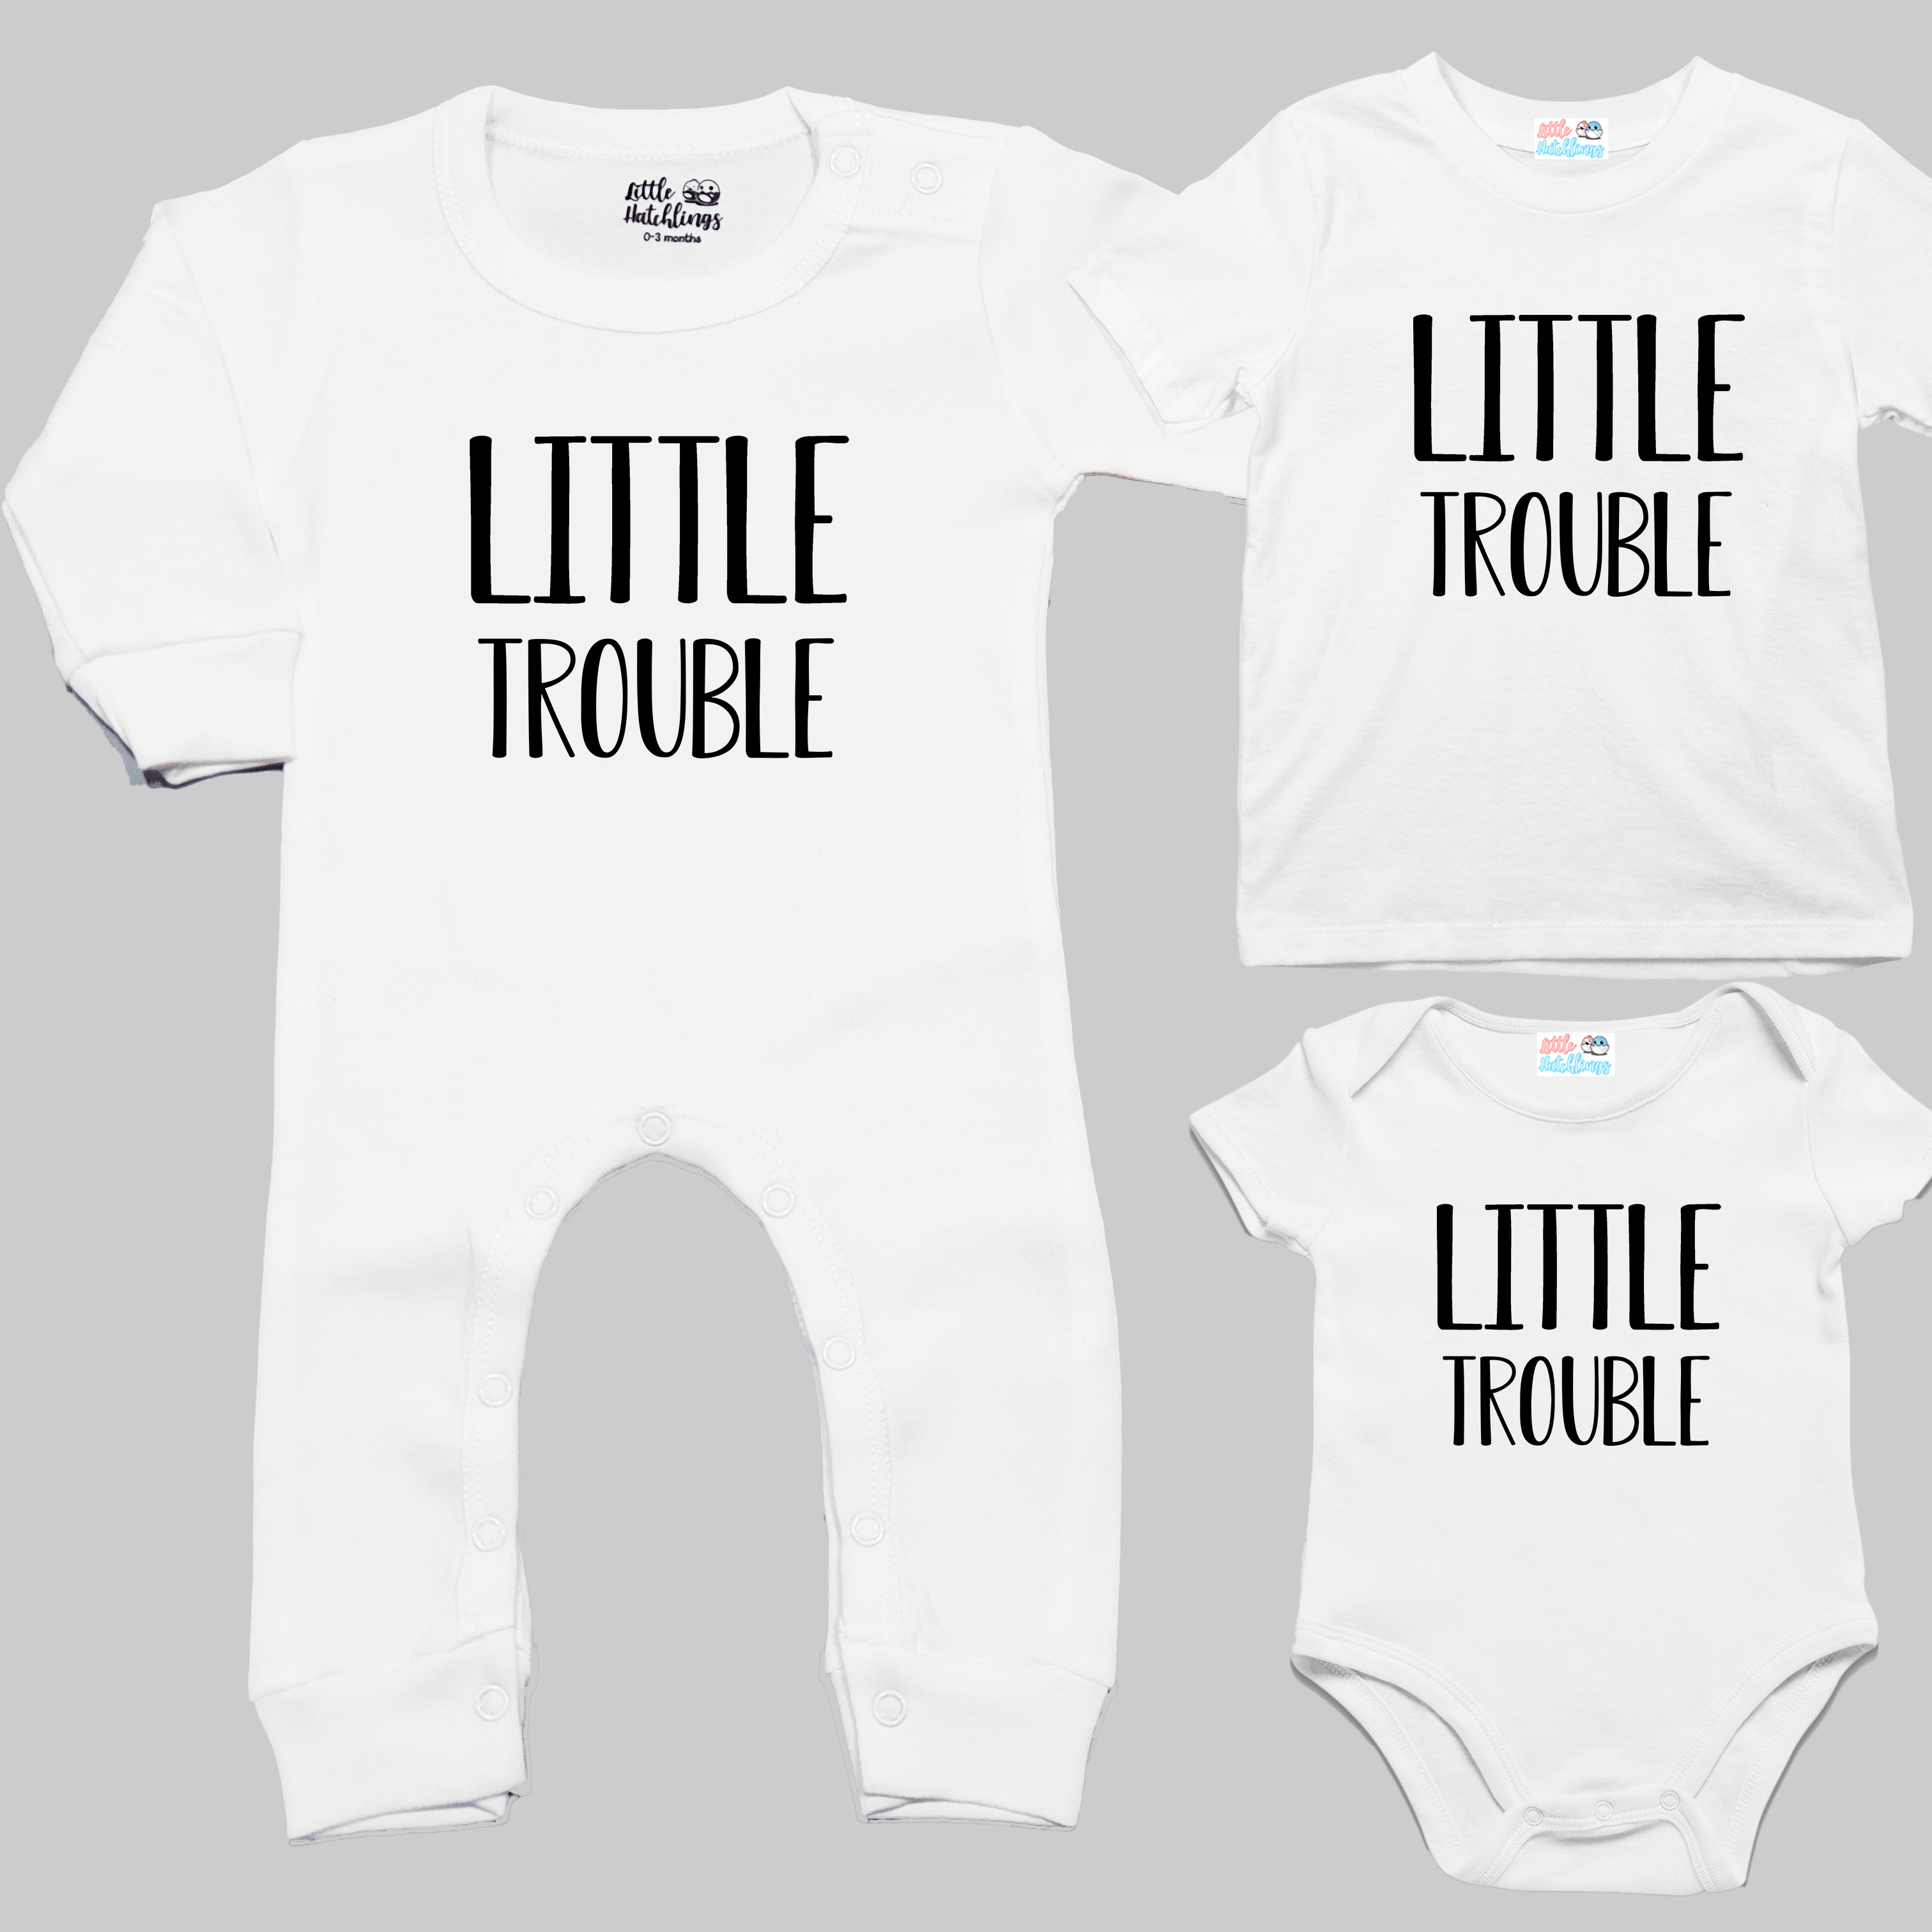 Big + Little Trouble White and Black Combo - Adult Tshirt + Full Romper